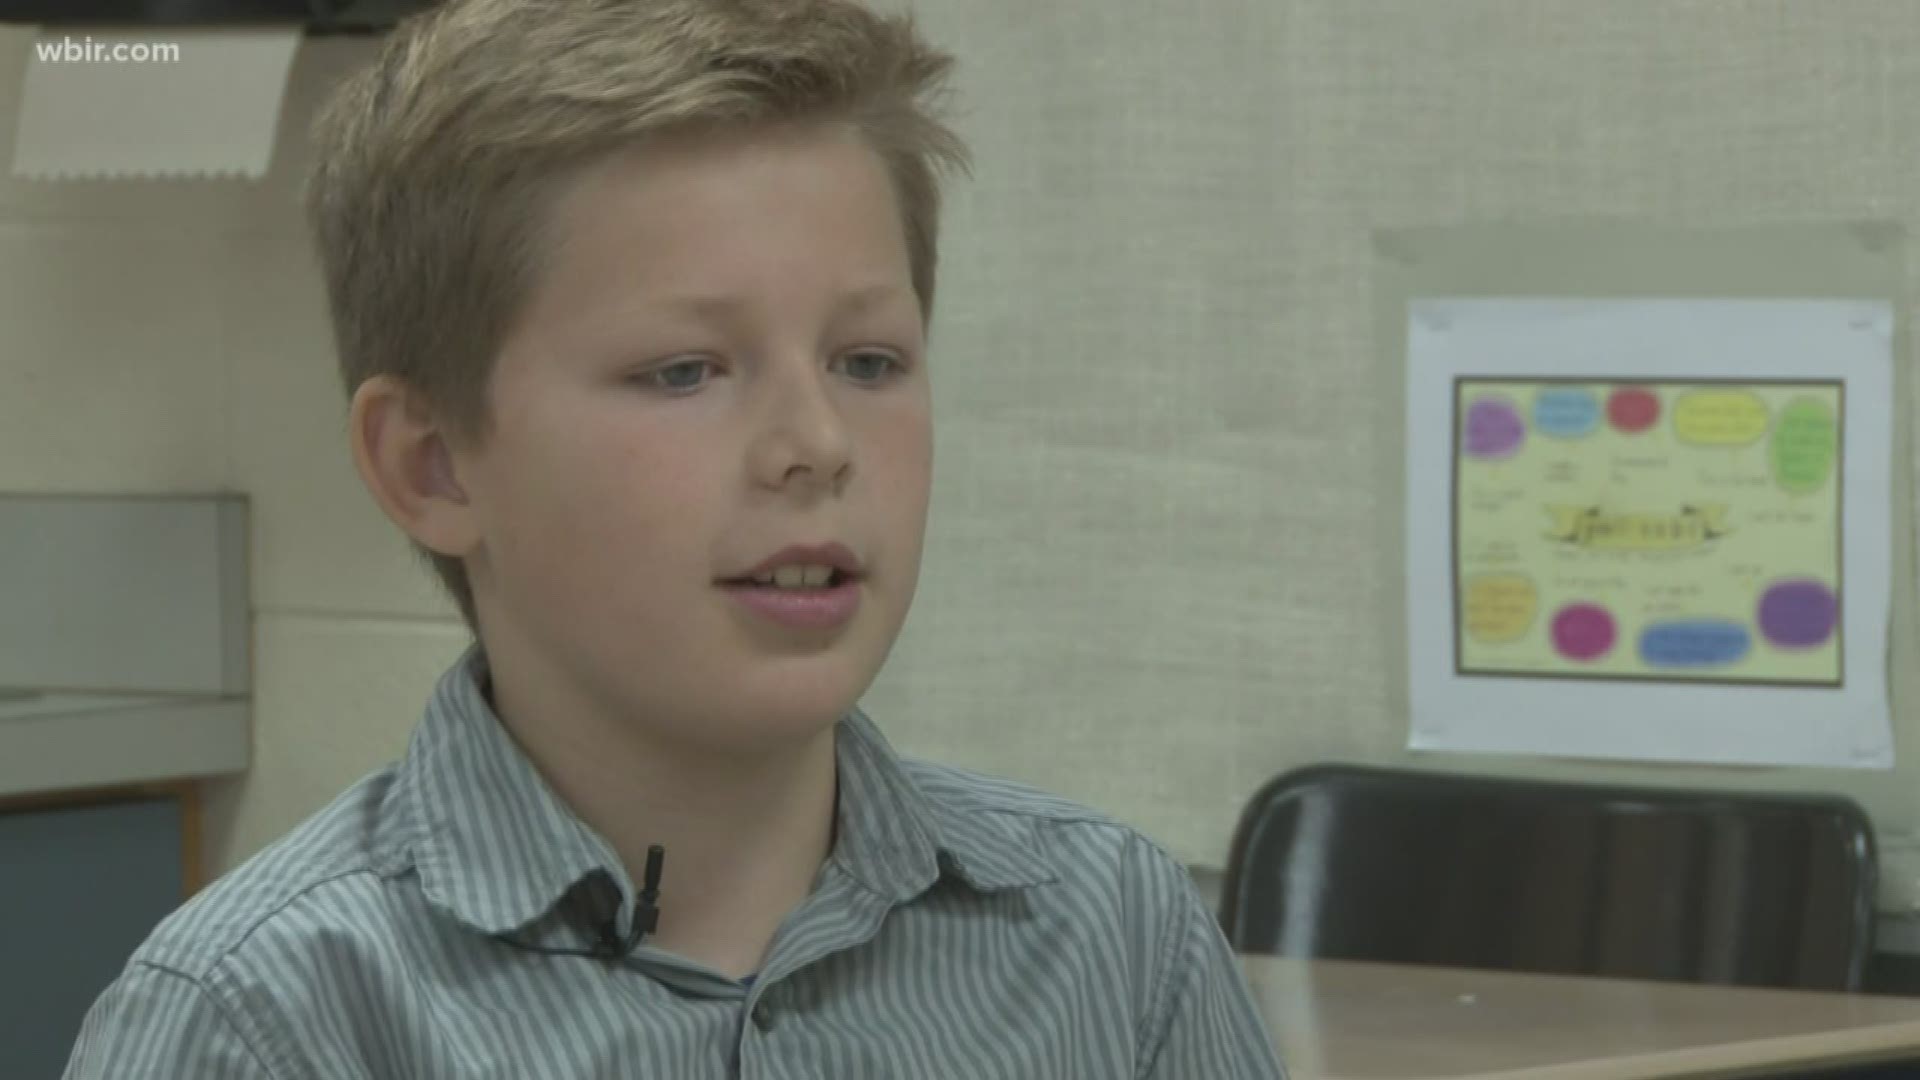 Fifth grade student is a role model for the entire school